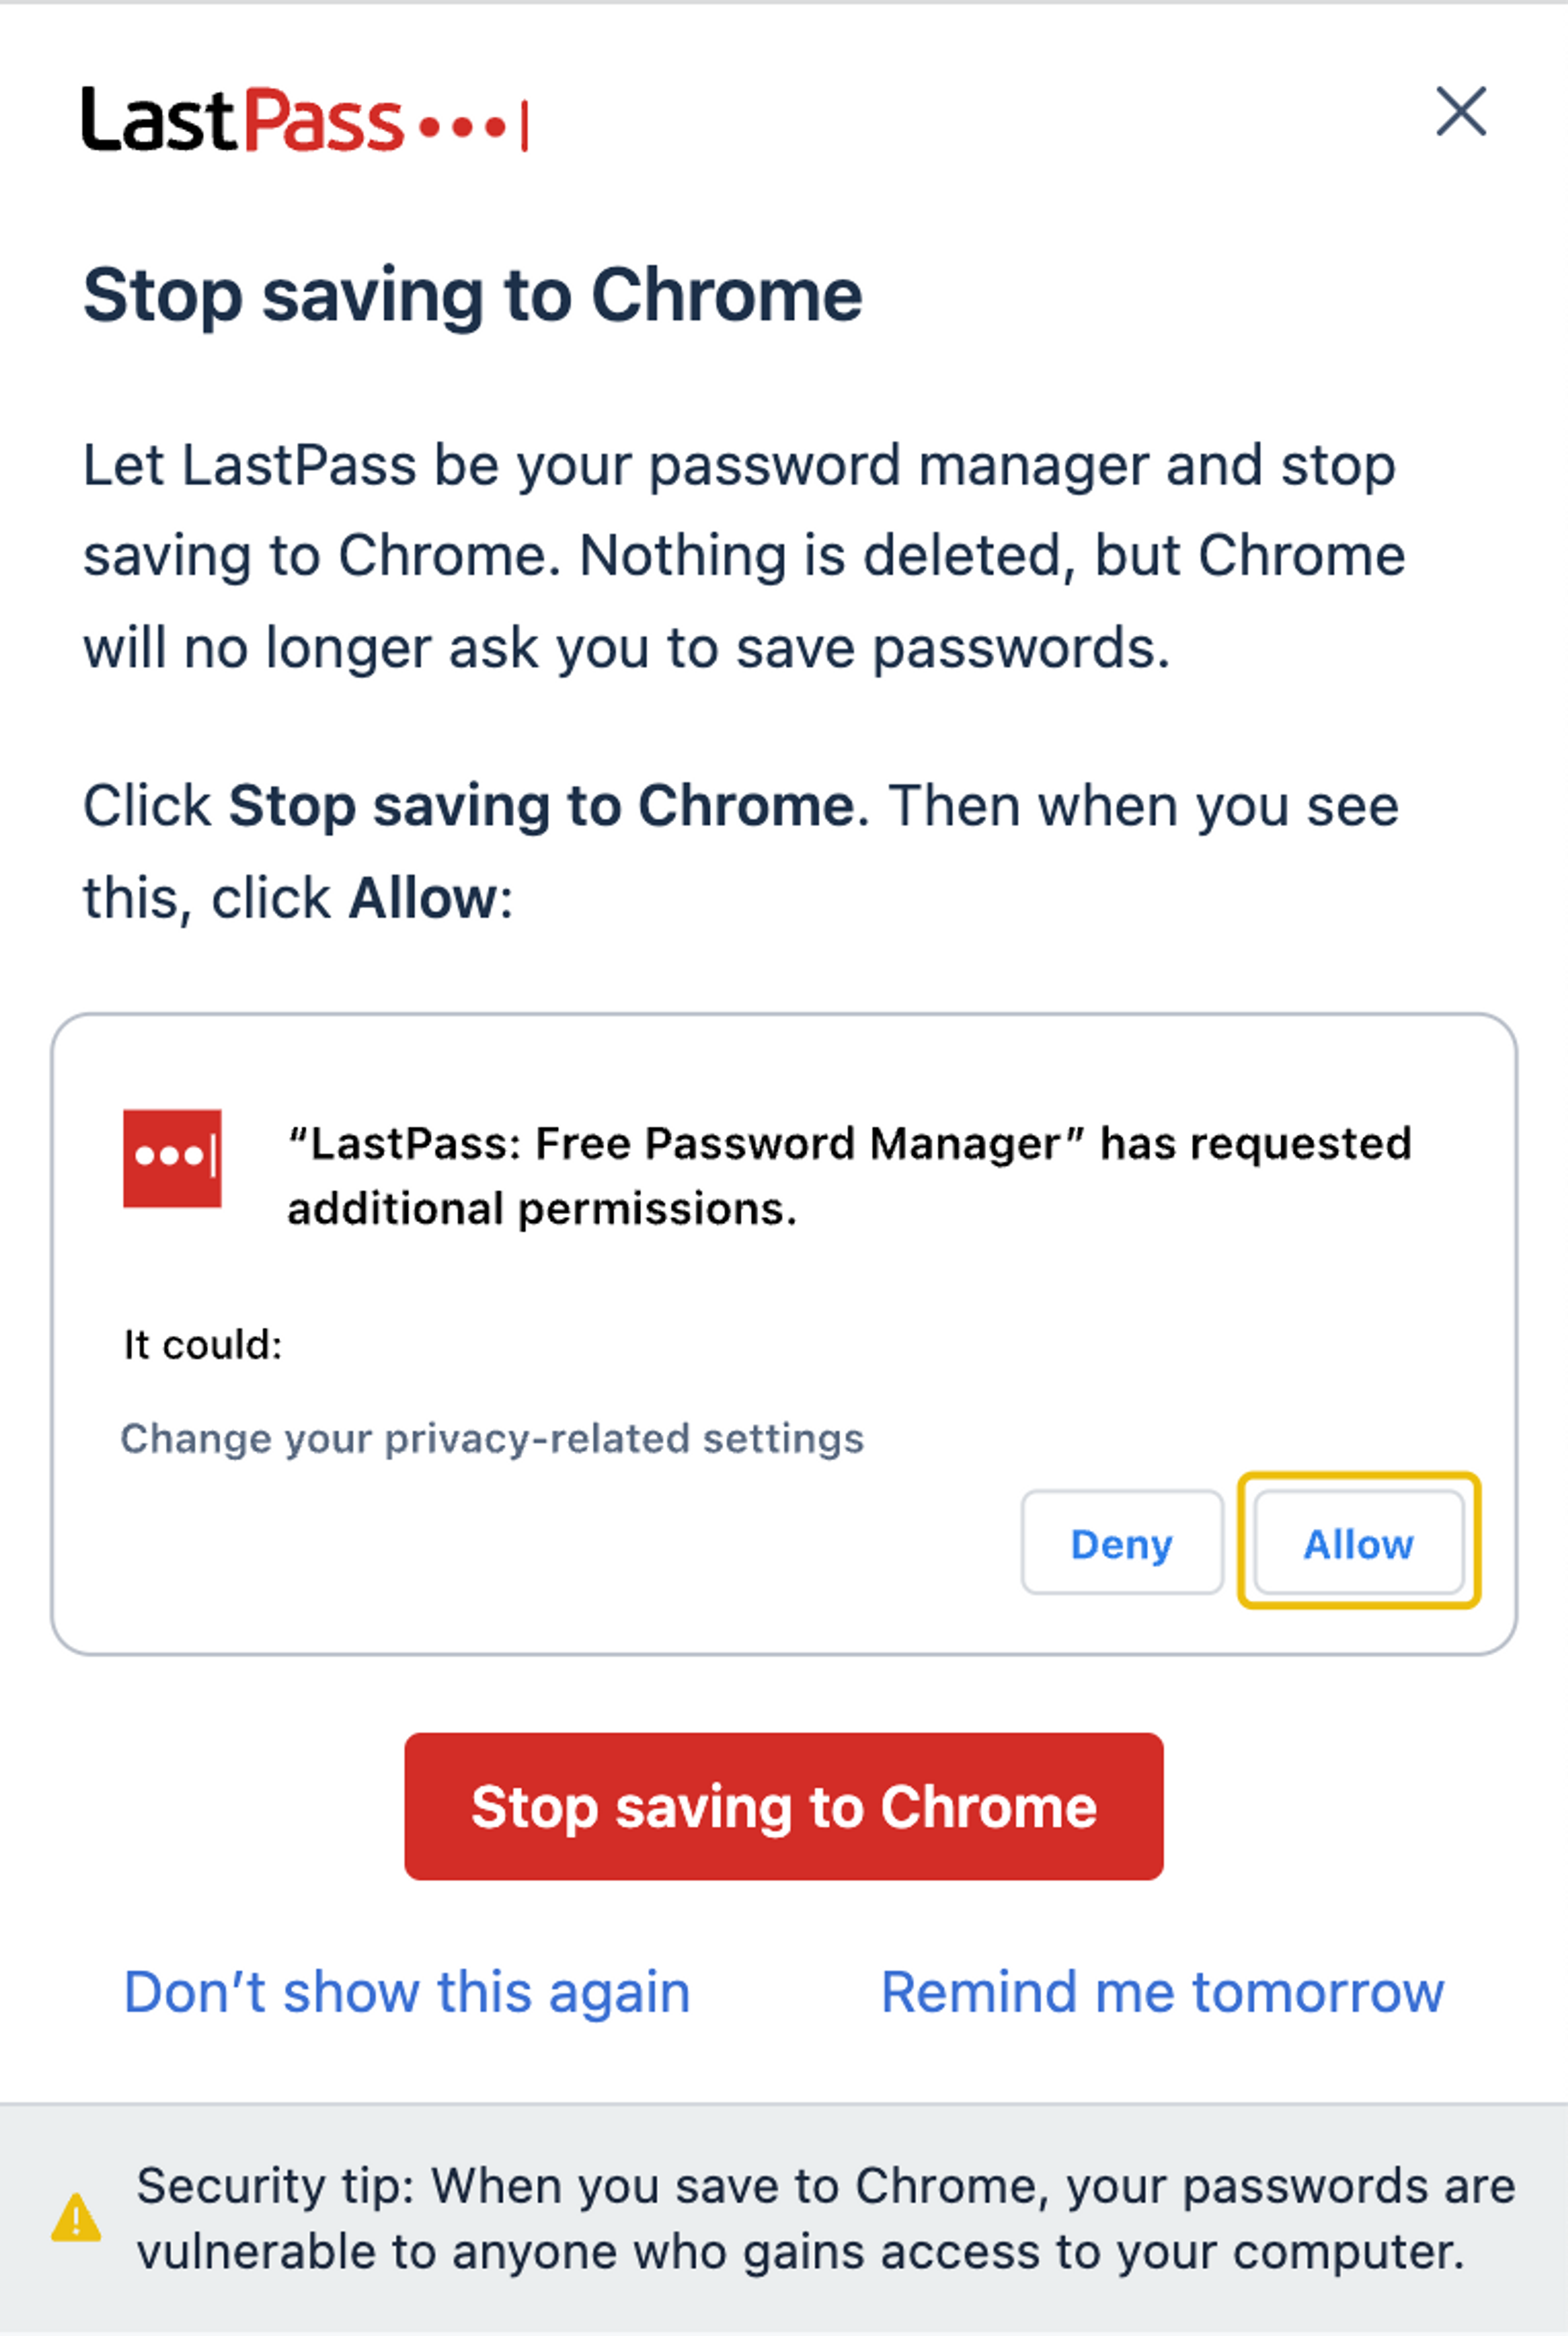 Lastpass asking to block Chrome password manager